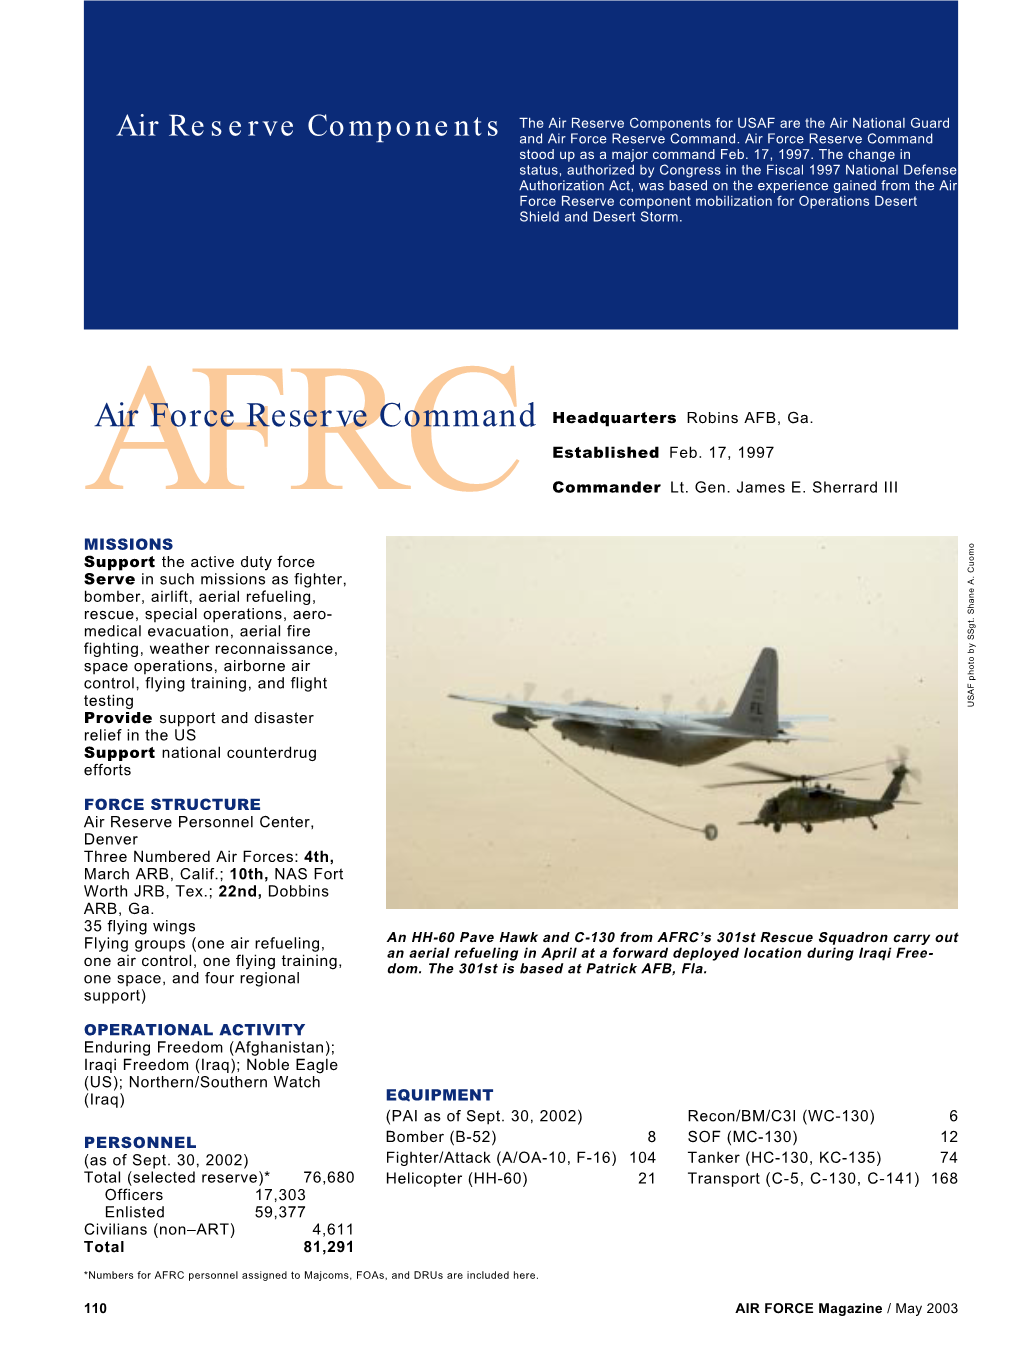 Air Reserve Components for USAF Are the Air National Guard Air Reserve Components and Air Force Reserve Command